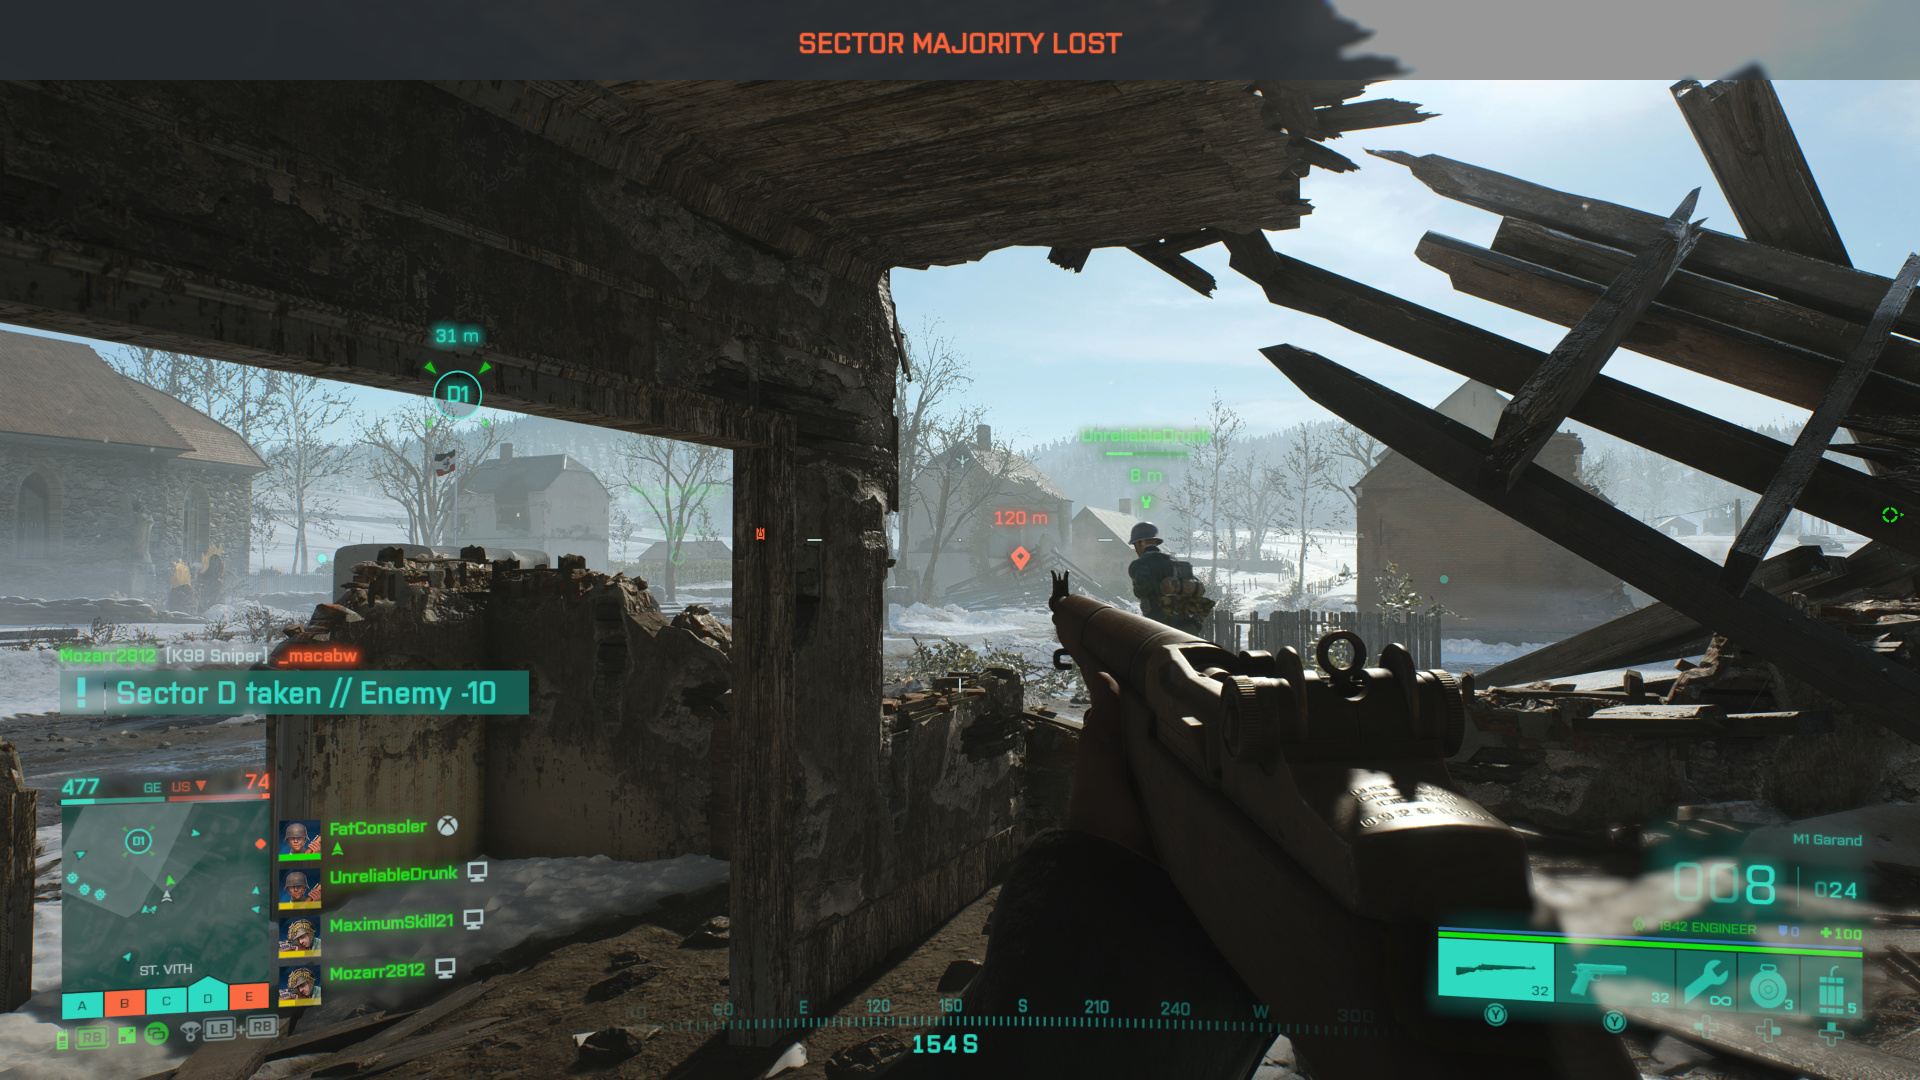 Battlefield 2042 impressions and gameplay preview